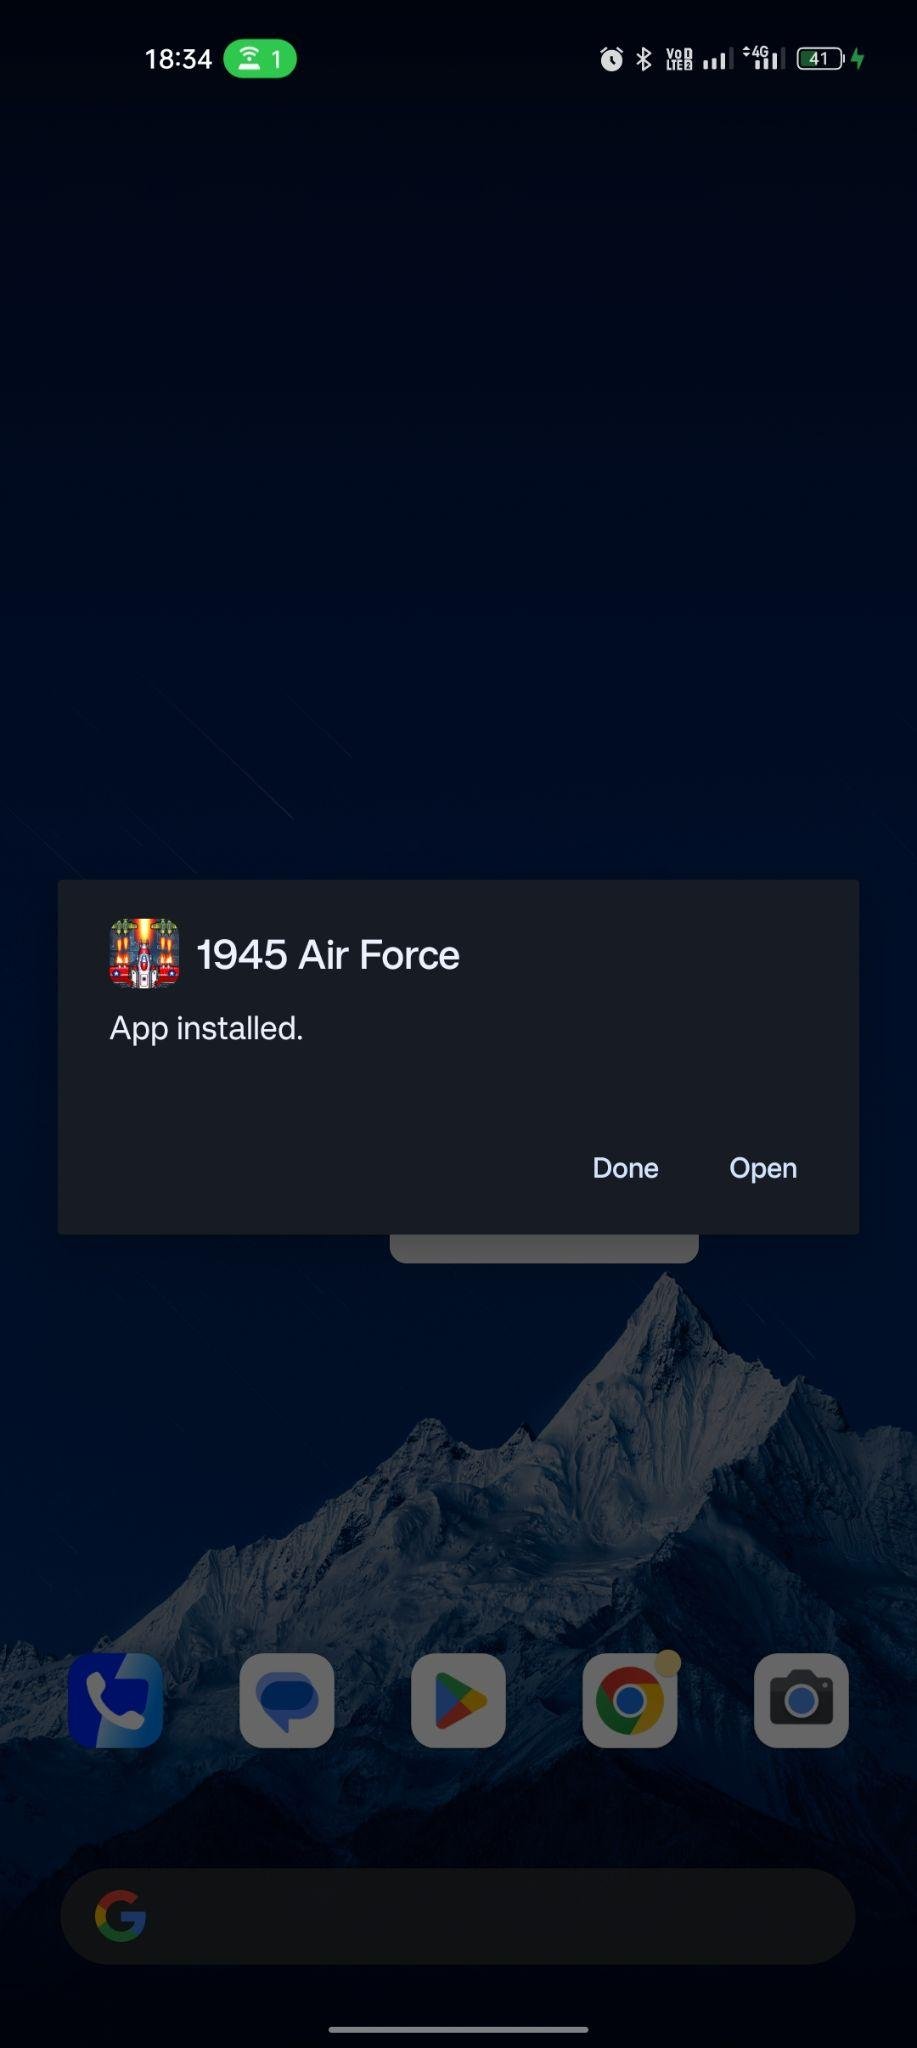 1945 Air Force apk installed